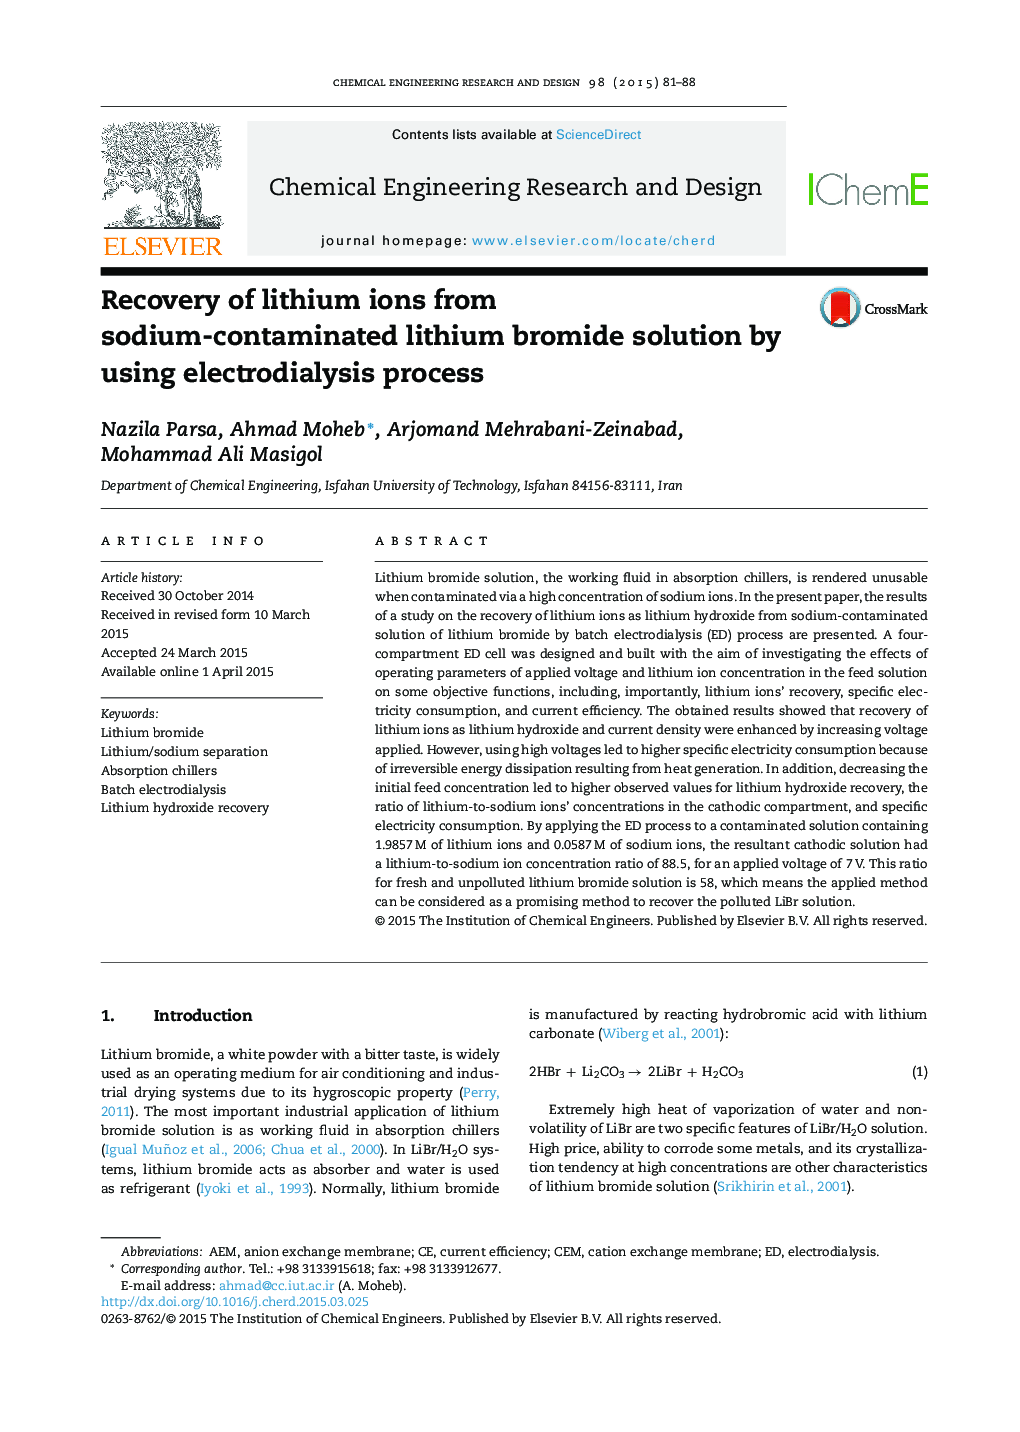 Recovery of lithium ions from sodium-contaminated lithium bromide solution by using electrodialysis process